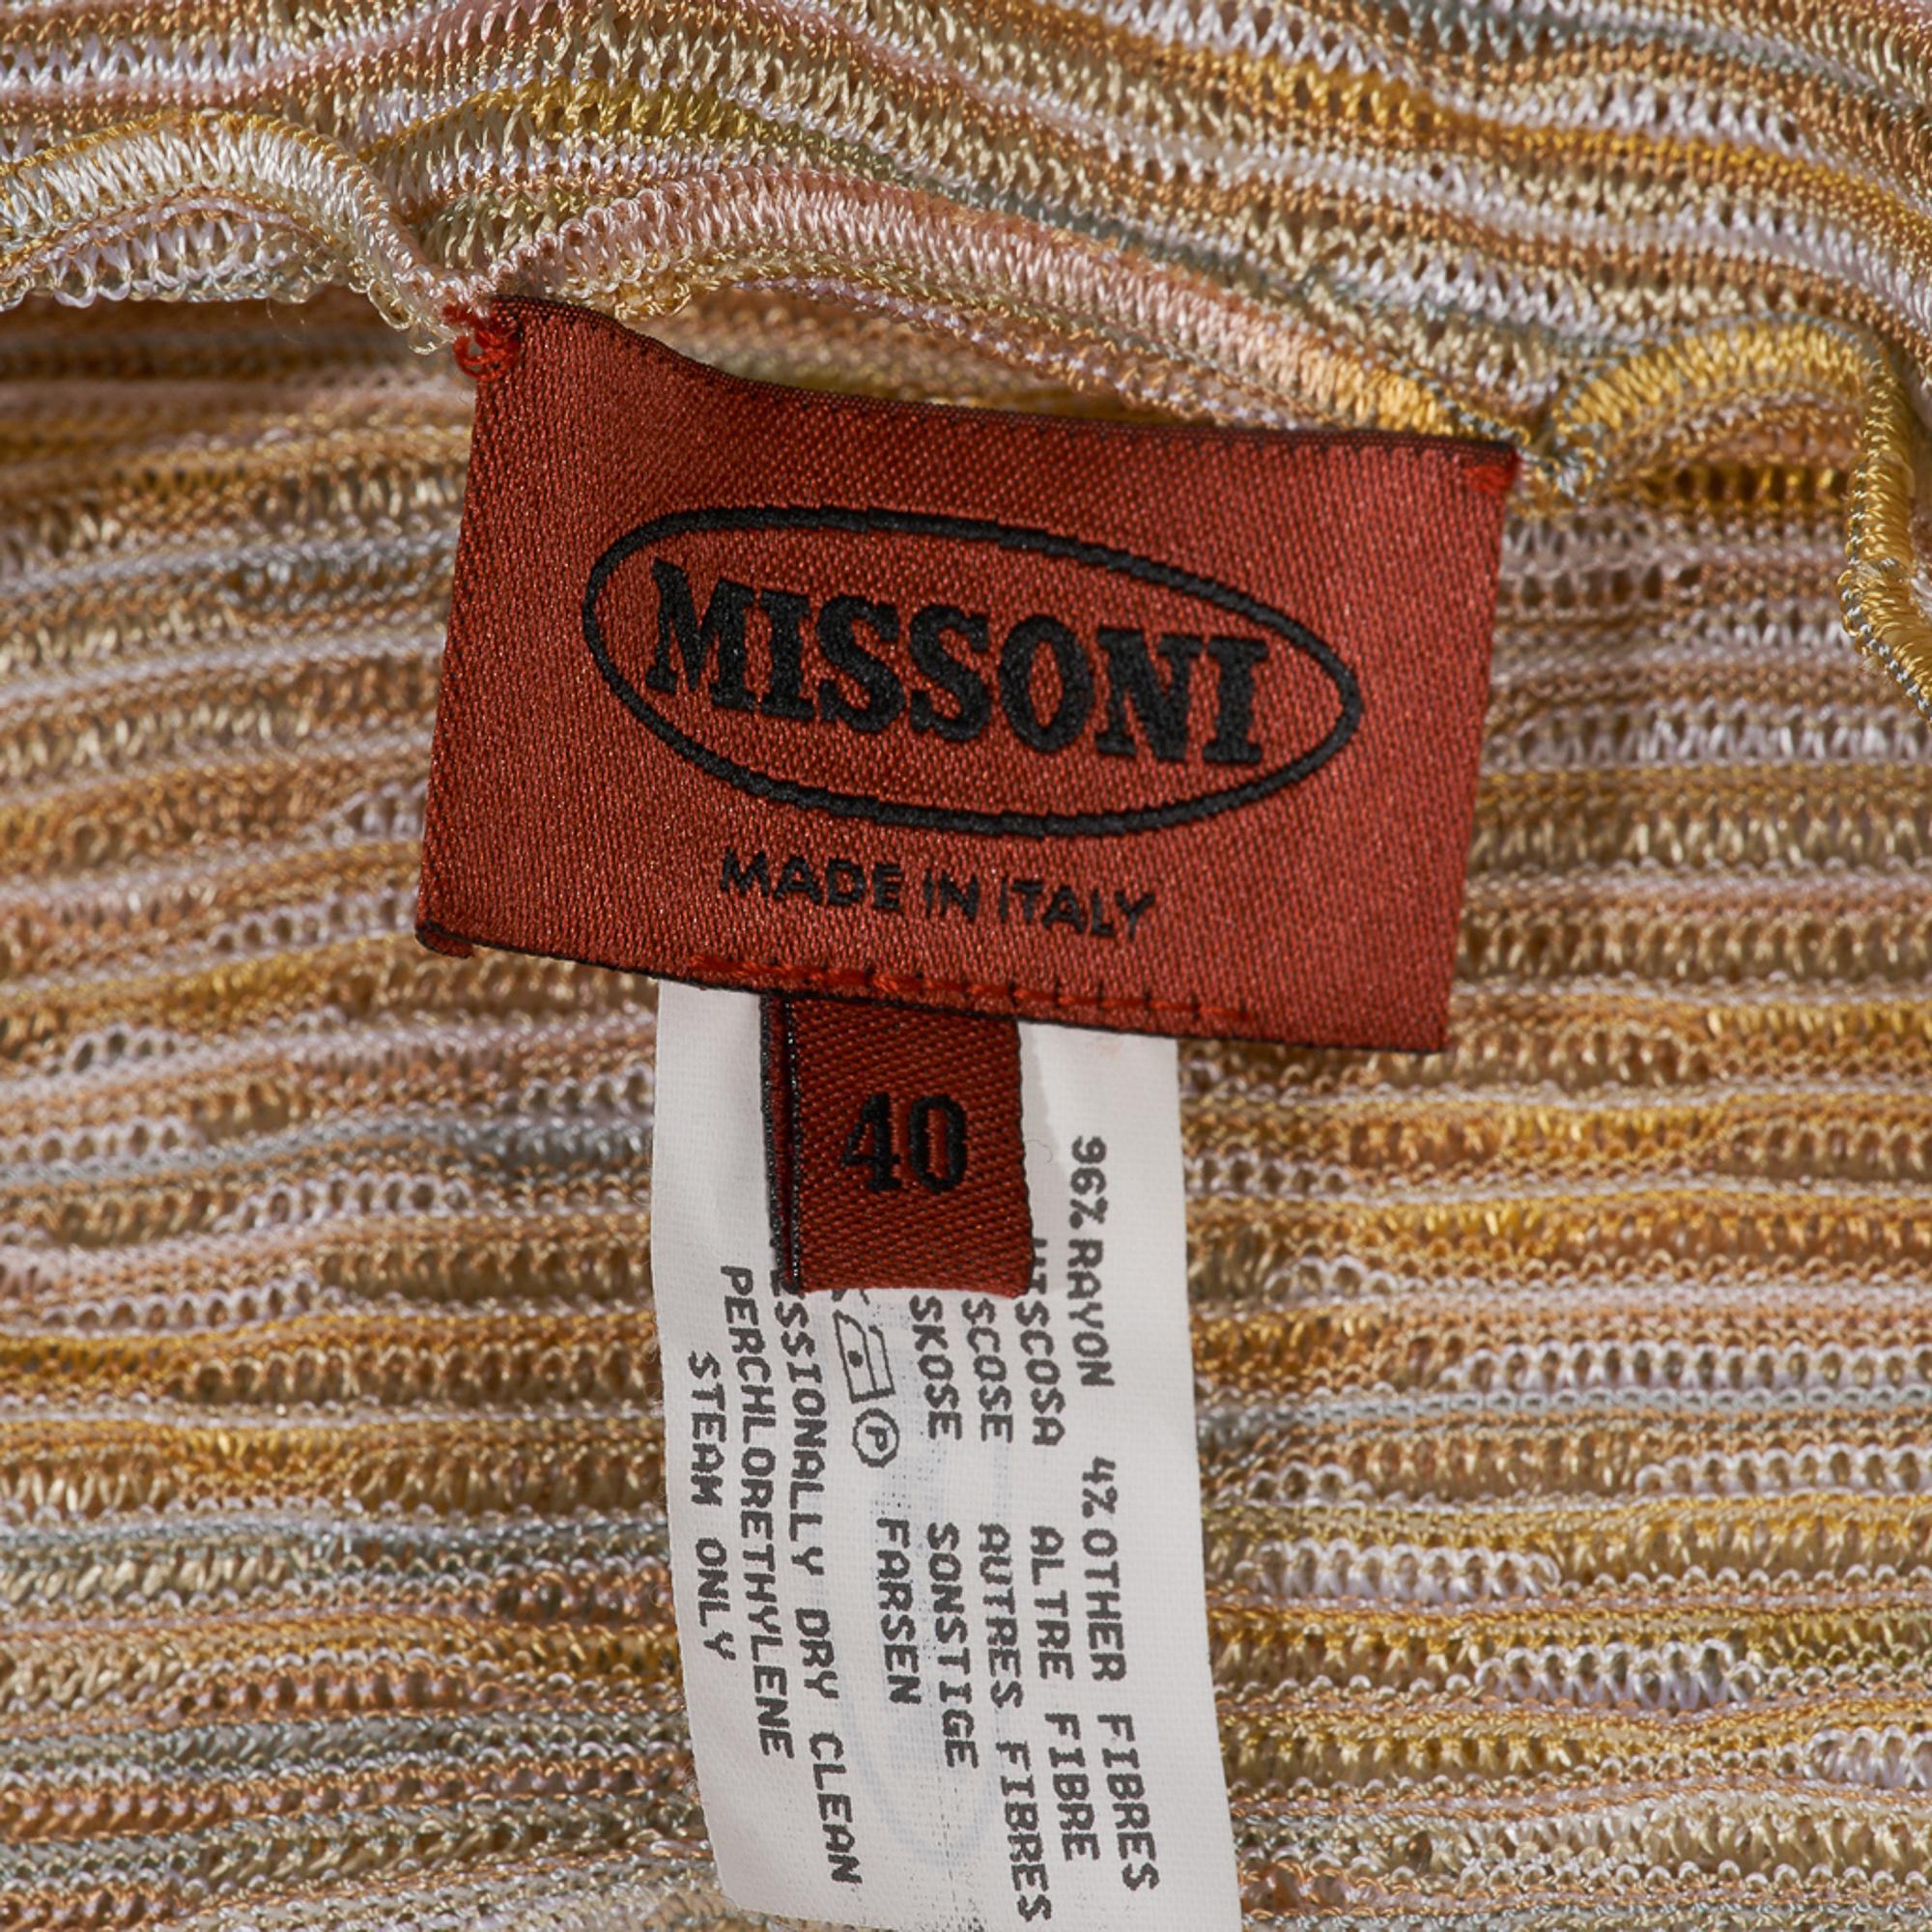 Missoni Dress and Cardigan Soft Pastel Colours Versatile 4 to 6 For Sale 4